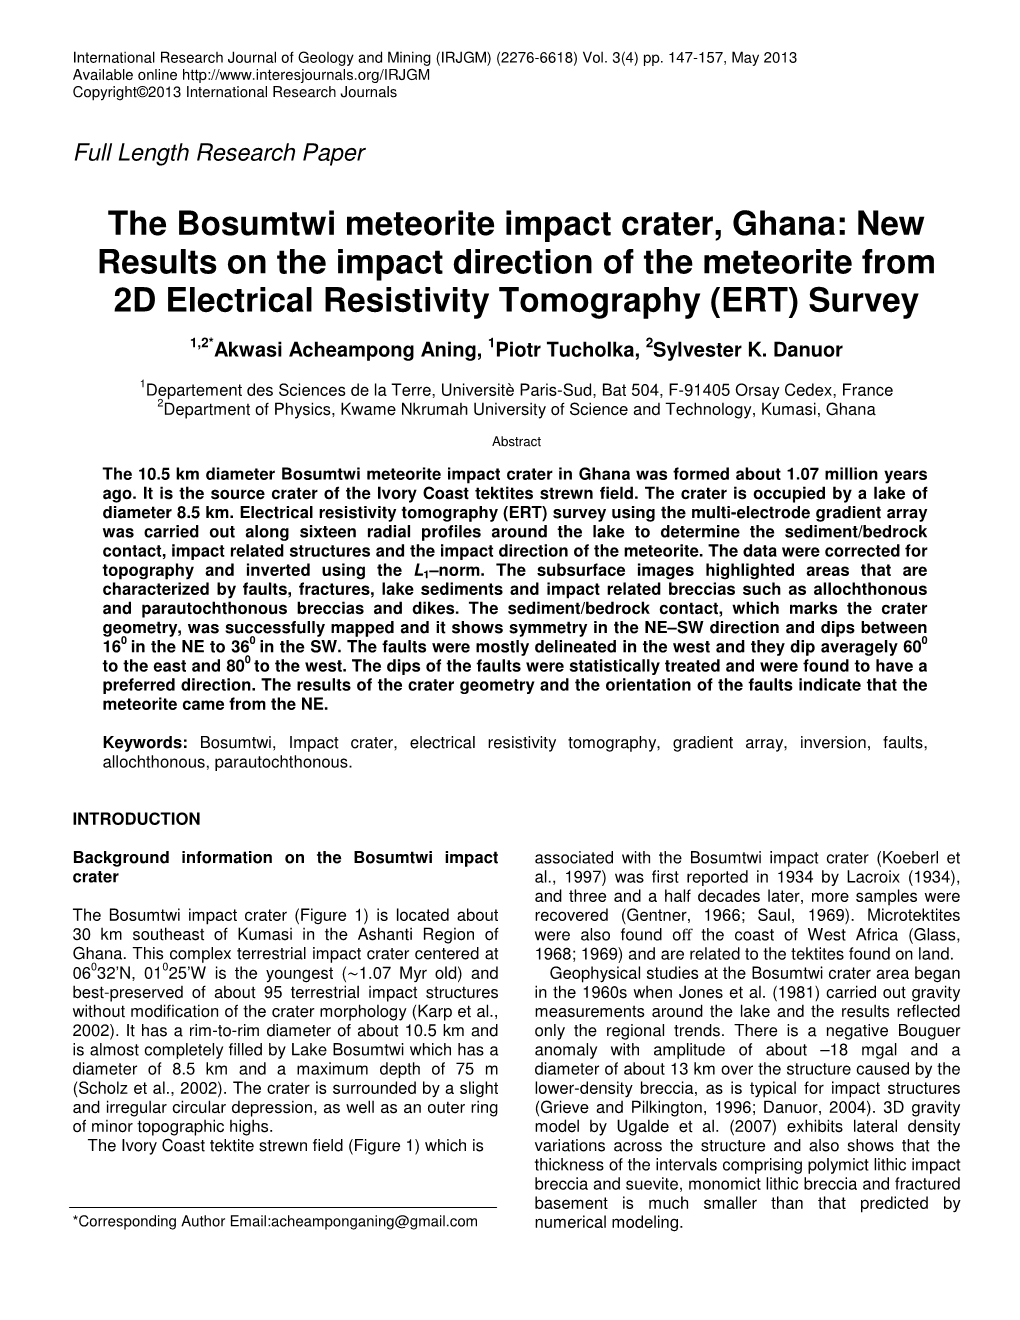 The Bosumtwi Meteorite Impact Crater, Ghana: New Results on the Impact Direction of the Meteorite from 2D Electrical Resistivity Tomography (ERT) Survey